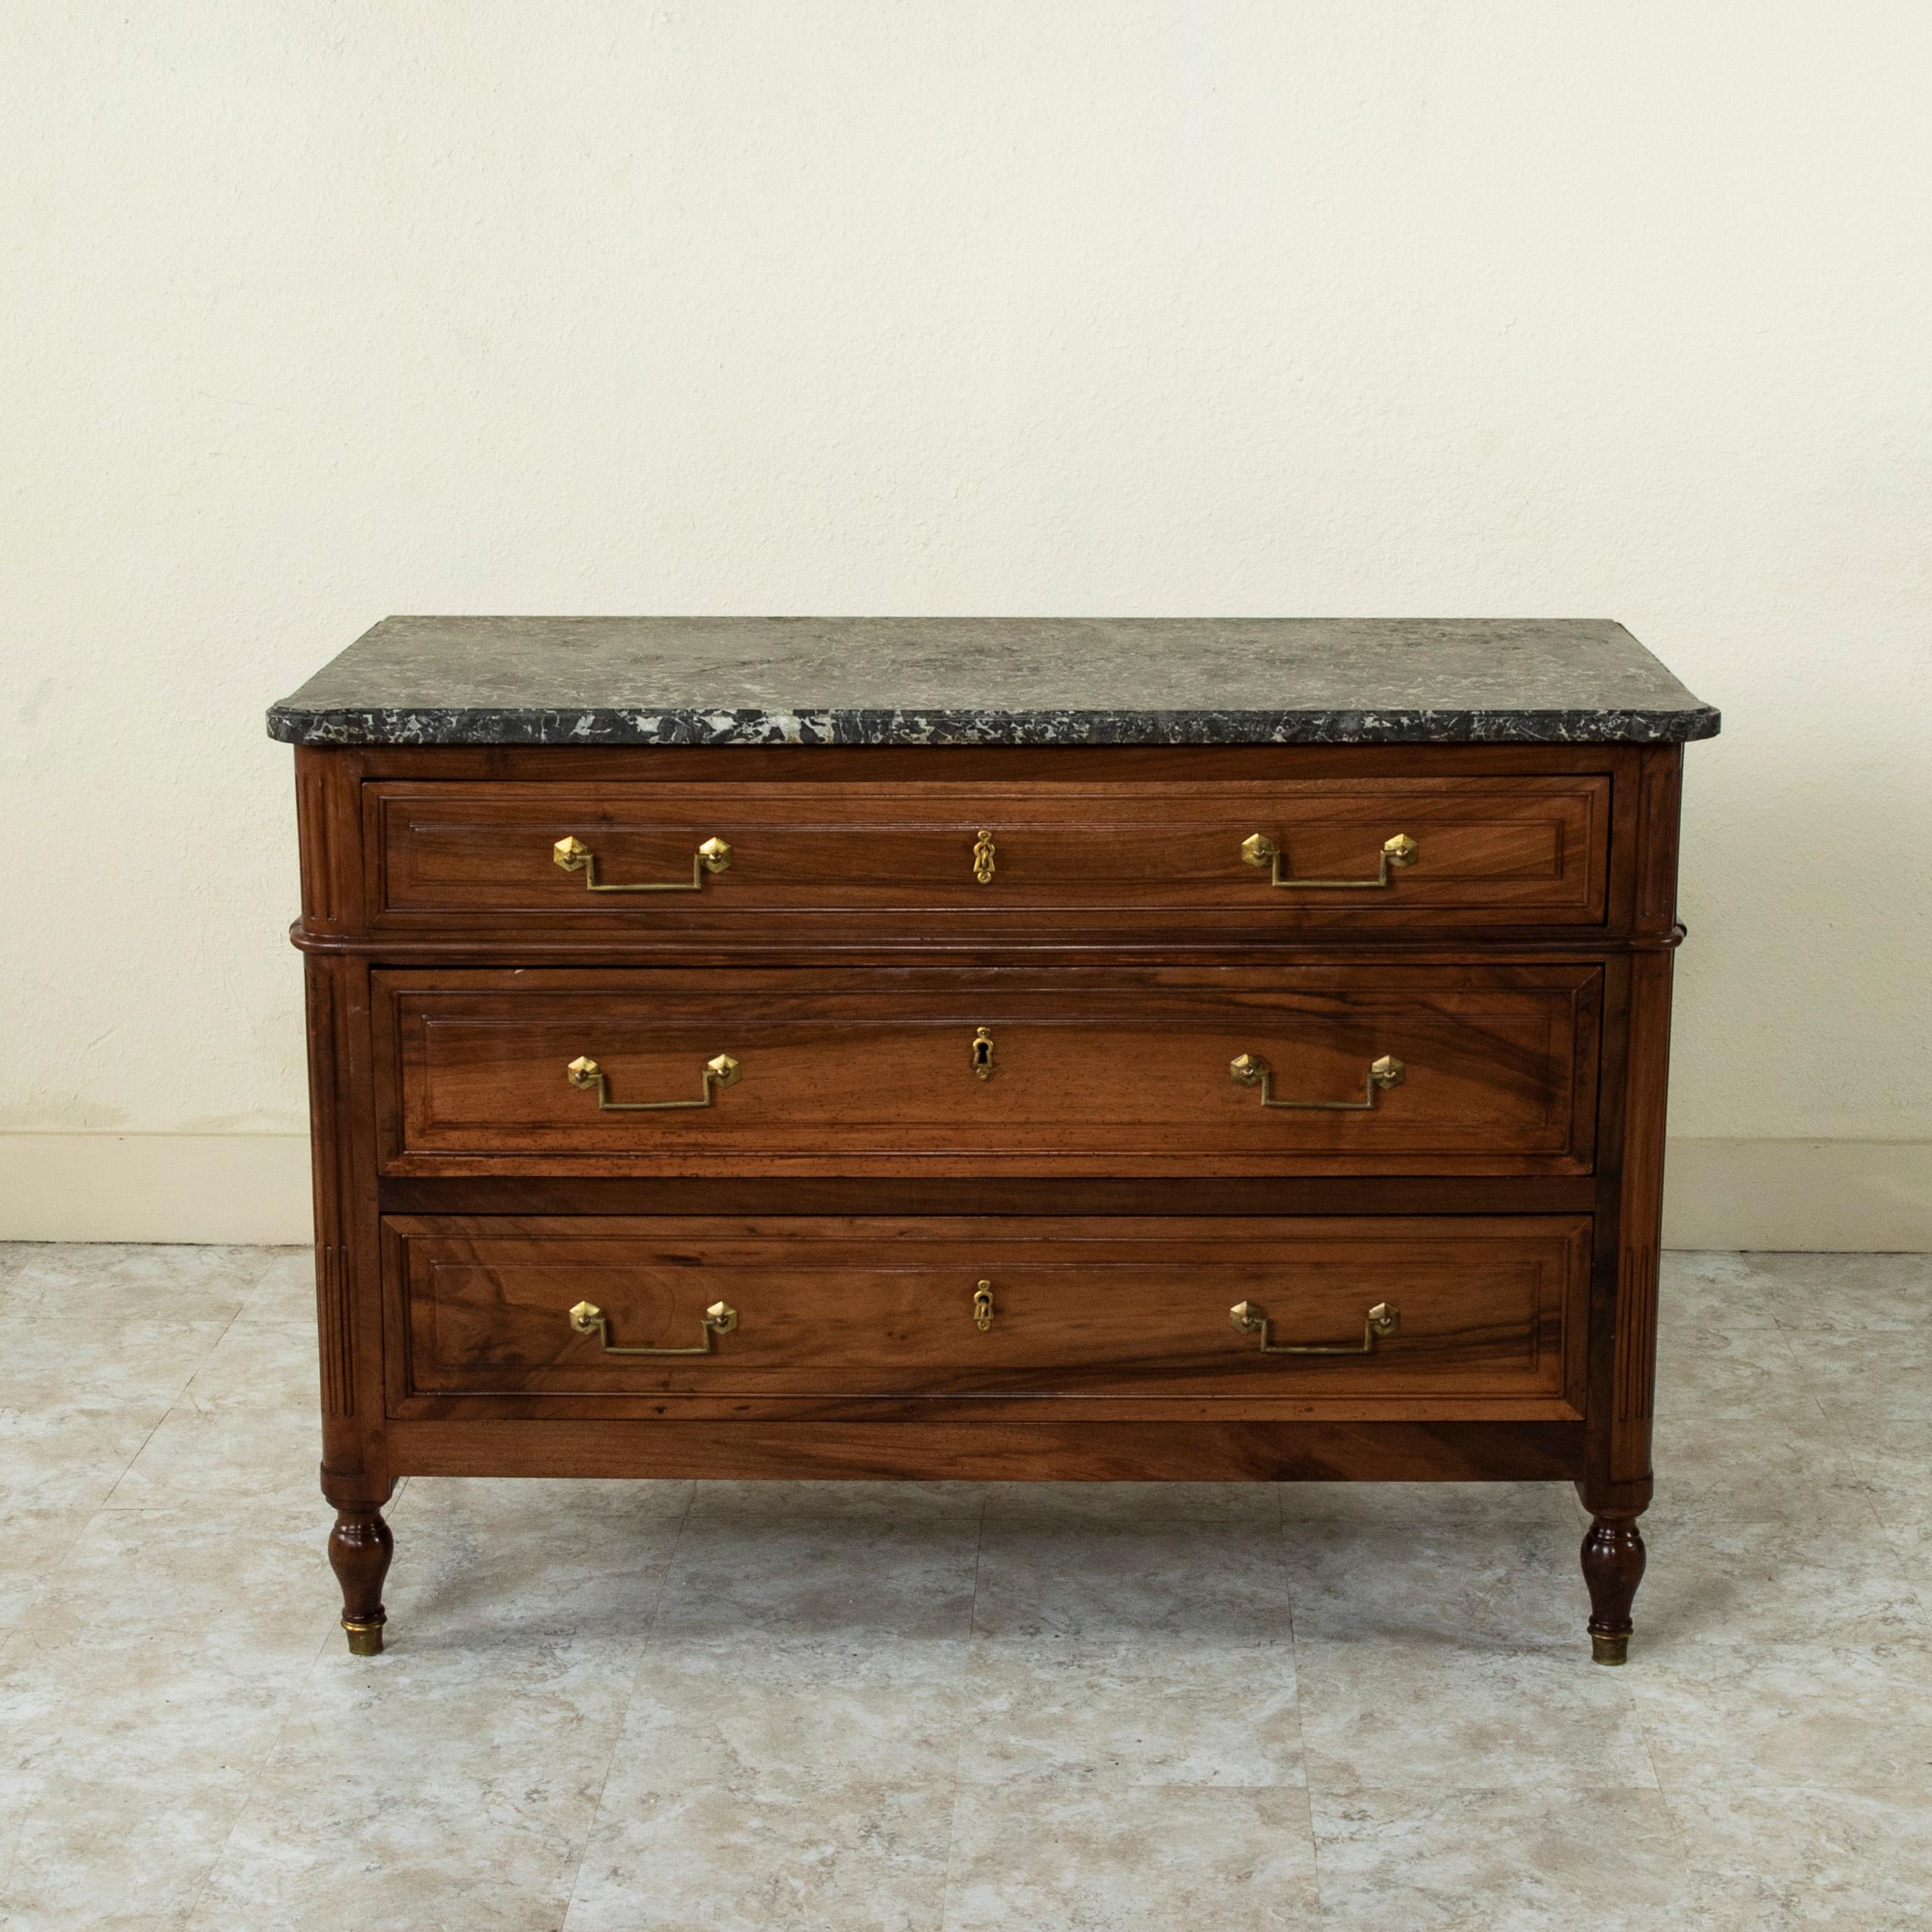 This late 18th century French Louis XVI period walnut commode or chest of drawers features a beveled Saint Anne marble top and fluted rounded corners. Its three drawers of dovetail construction are fitted with classic squared drop handle drawer